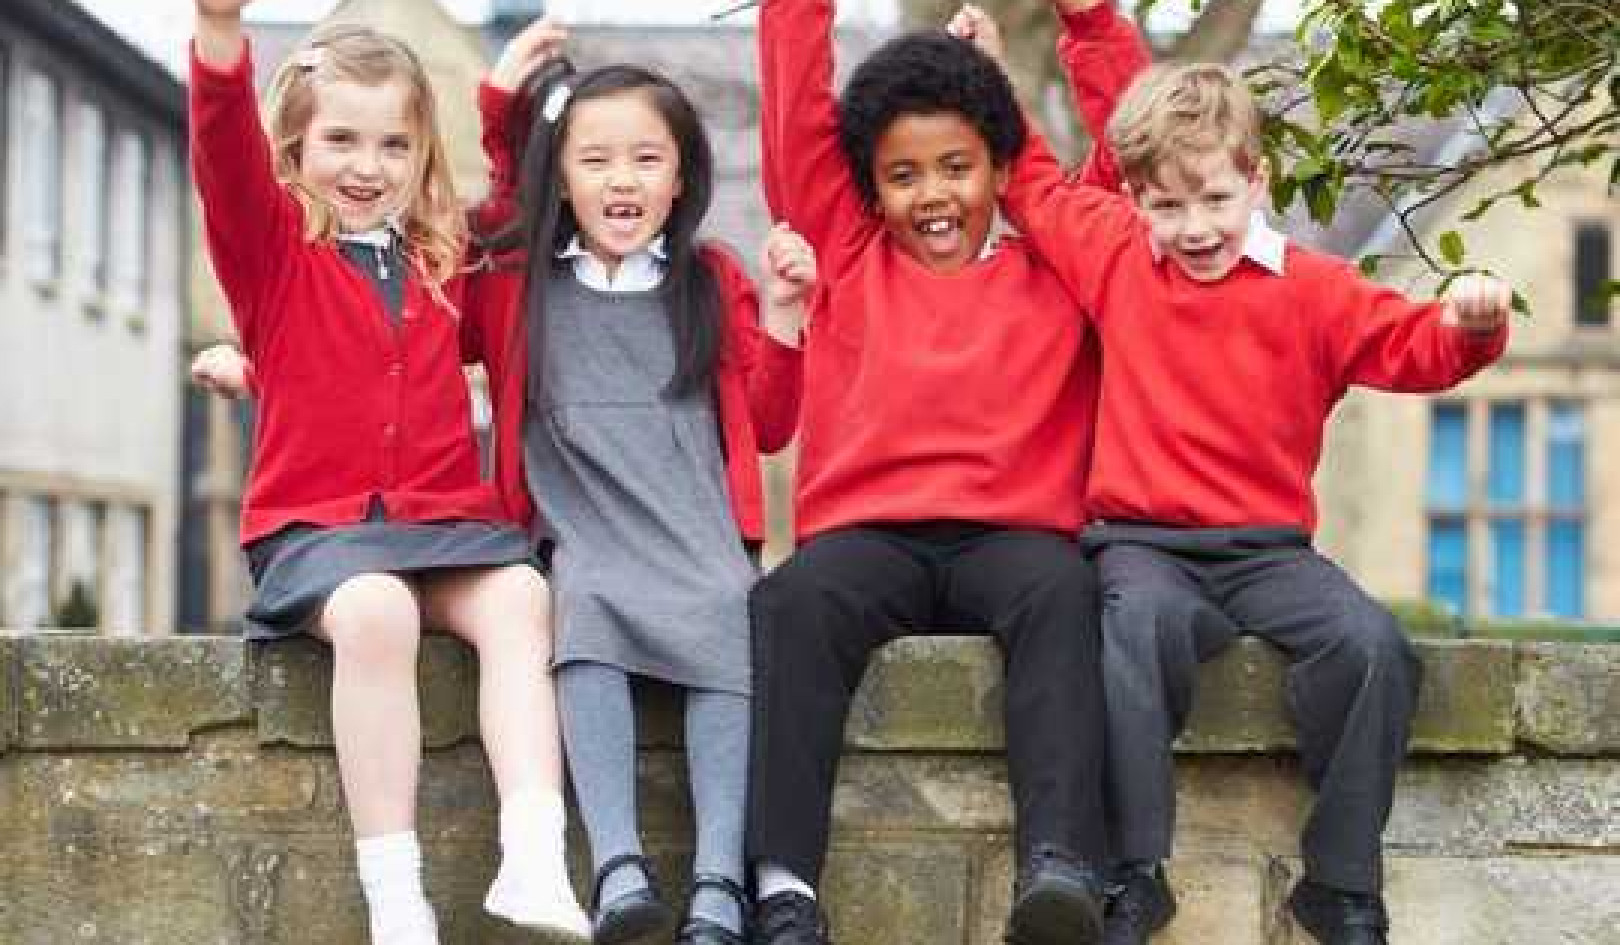 Schools Could Teach Children How To Be Happy – But They Foster Competition Instead